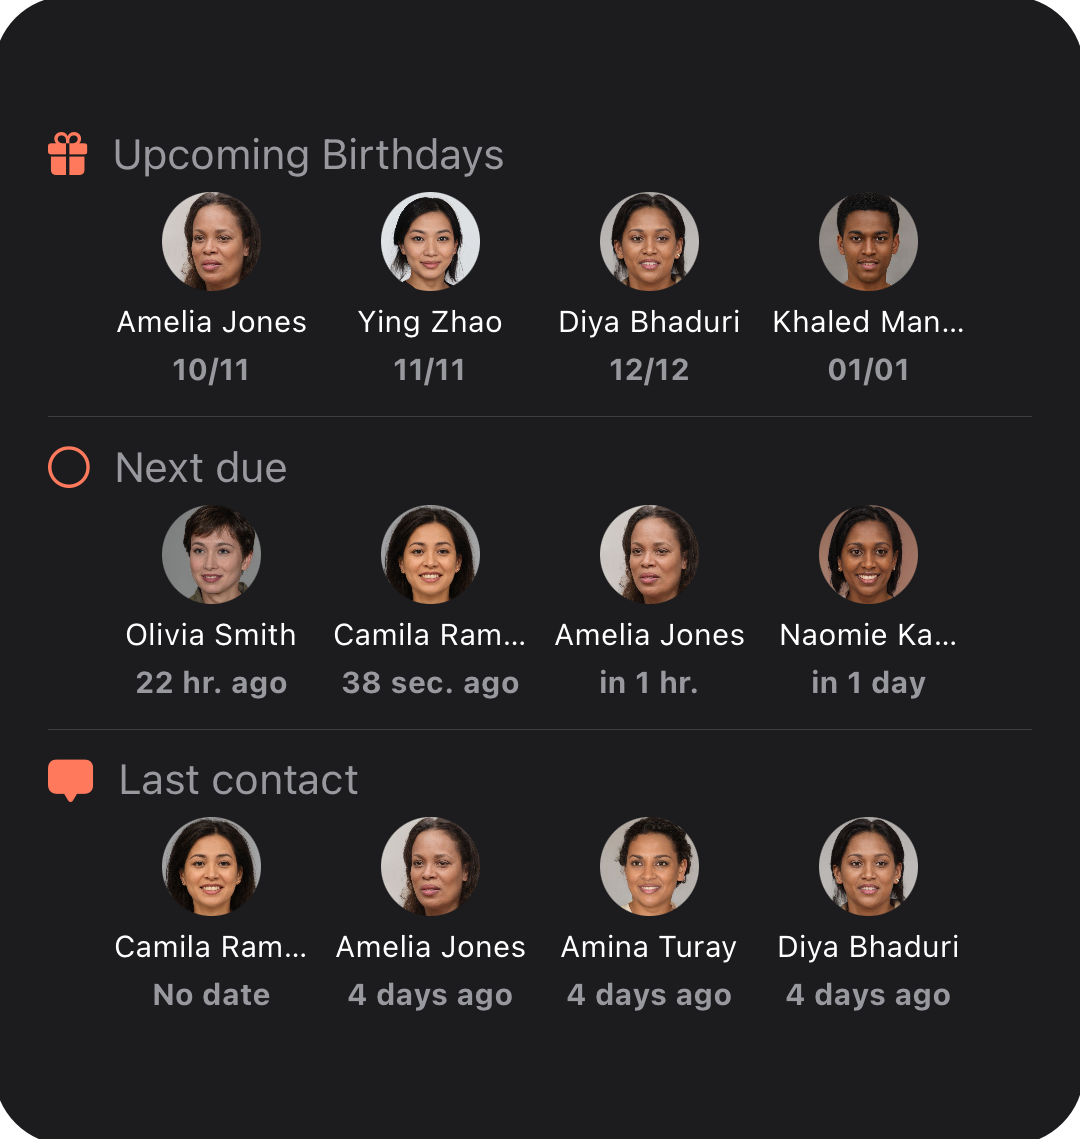 Amicu Widget with birthdays, due contacts, and last contacted people.